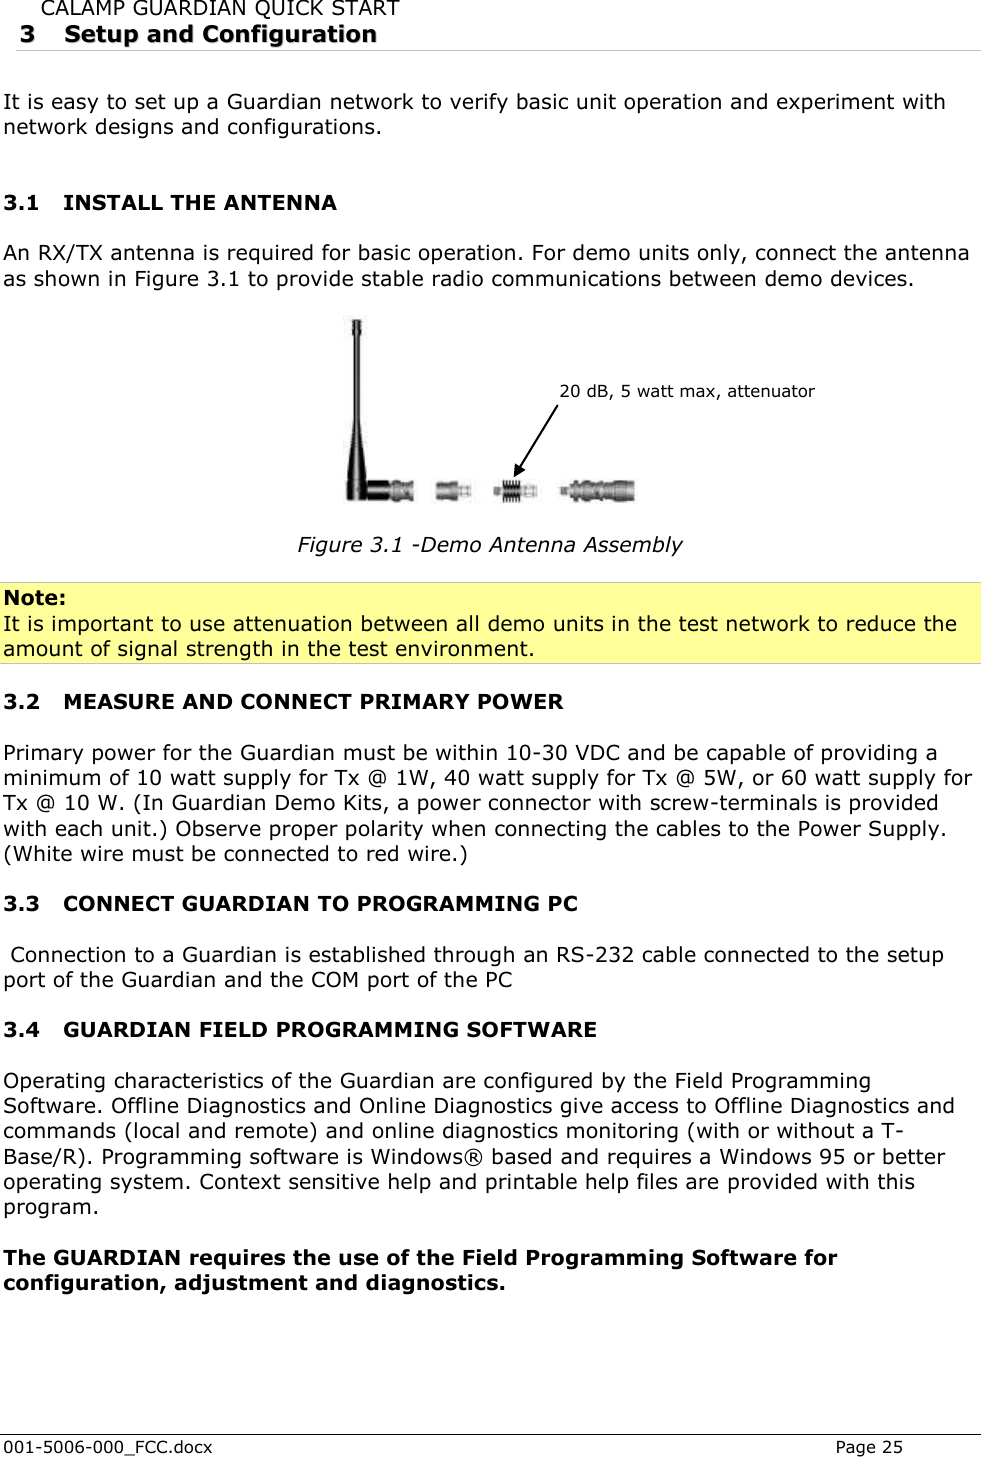  001-5006-000_FCC.docx    Page 25 CALAMP GUARDIAN QUICK START 33  SSeettuupp  aanndd  CCoonnffiigguurraattiioonn  It is easy to set up a Guardian network to verify basic unit operation and experiment with network designs and configurations.   3.1 INSTALL THE ANTENNA An RX/TX antenna is required for basic operation. For demo units only, connect the antenna as shown in Figure 3.1 to provide stable radio communications between demo devices.    Figure 3.1 -Demo Antenna Assembly  Note: It is important to use attenuation between all demo units in the test network to reduce the amount of signal strength in the test environment.  3.2 MEASURE AND CONNECT PRIMARY POWER Primary power for the Guardian must be within 10-30 VDC and be capable of providing a minimum of 10 watt supply for Tx @ 1W, 40 watt supply for Tx @ 5W, or 60 watt supply for Tx @ 10 W. (In Guardian Demo Kits, a power connector with screw-terminals is provided with each unit.) Observe proper polarity when connecting the cables to the Power Supply. (White wire must be connected to red wire.) 3.3 CONNECT GUARDIAN TO PROGRAMMING PC  Connection to a Guardian is established through an RS-232 cable connected to the setup port of the Guardian and the COM port of the PC 3.4 GUARDIAN FIELD PROGRAMMING SOFTWARE Operating characteristics of the Guardian are configured by the Field Programming Software. Offline Diagnostics and Online Diagnostics give access to Offline Diagnostics and commands (local and remote) and online diagnostics monitoring (with or without a T-Base/R). Programming software is Windows® based and requires a Windows 95 or better operating system. Context sensitive help and printable help files are provided with this program.  The GUARDIAN requires the use of the Field Programming Software for configuration, adjustment and diagnostics.                       20 dB, 5 watt max, attenuator 